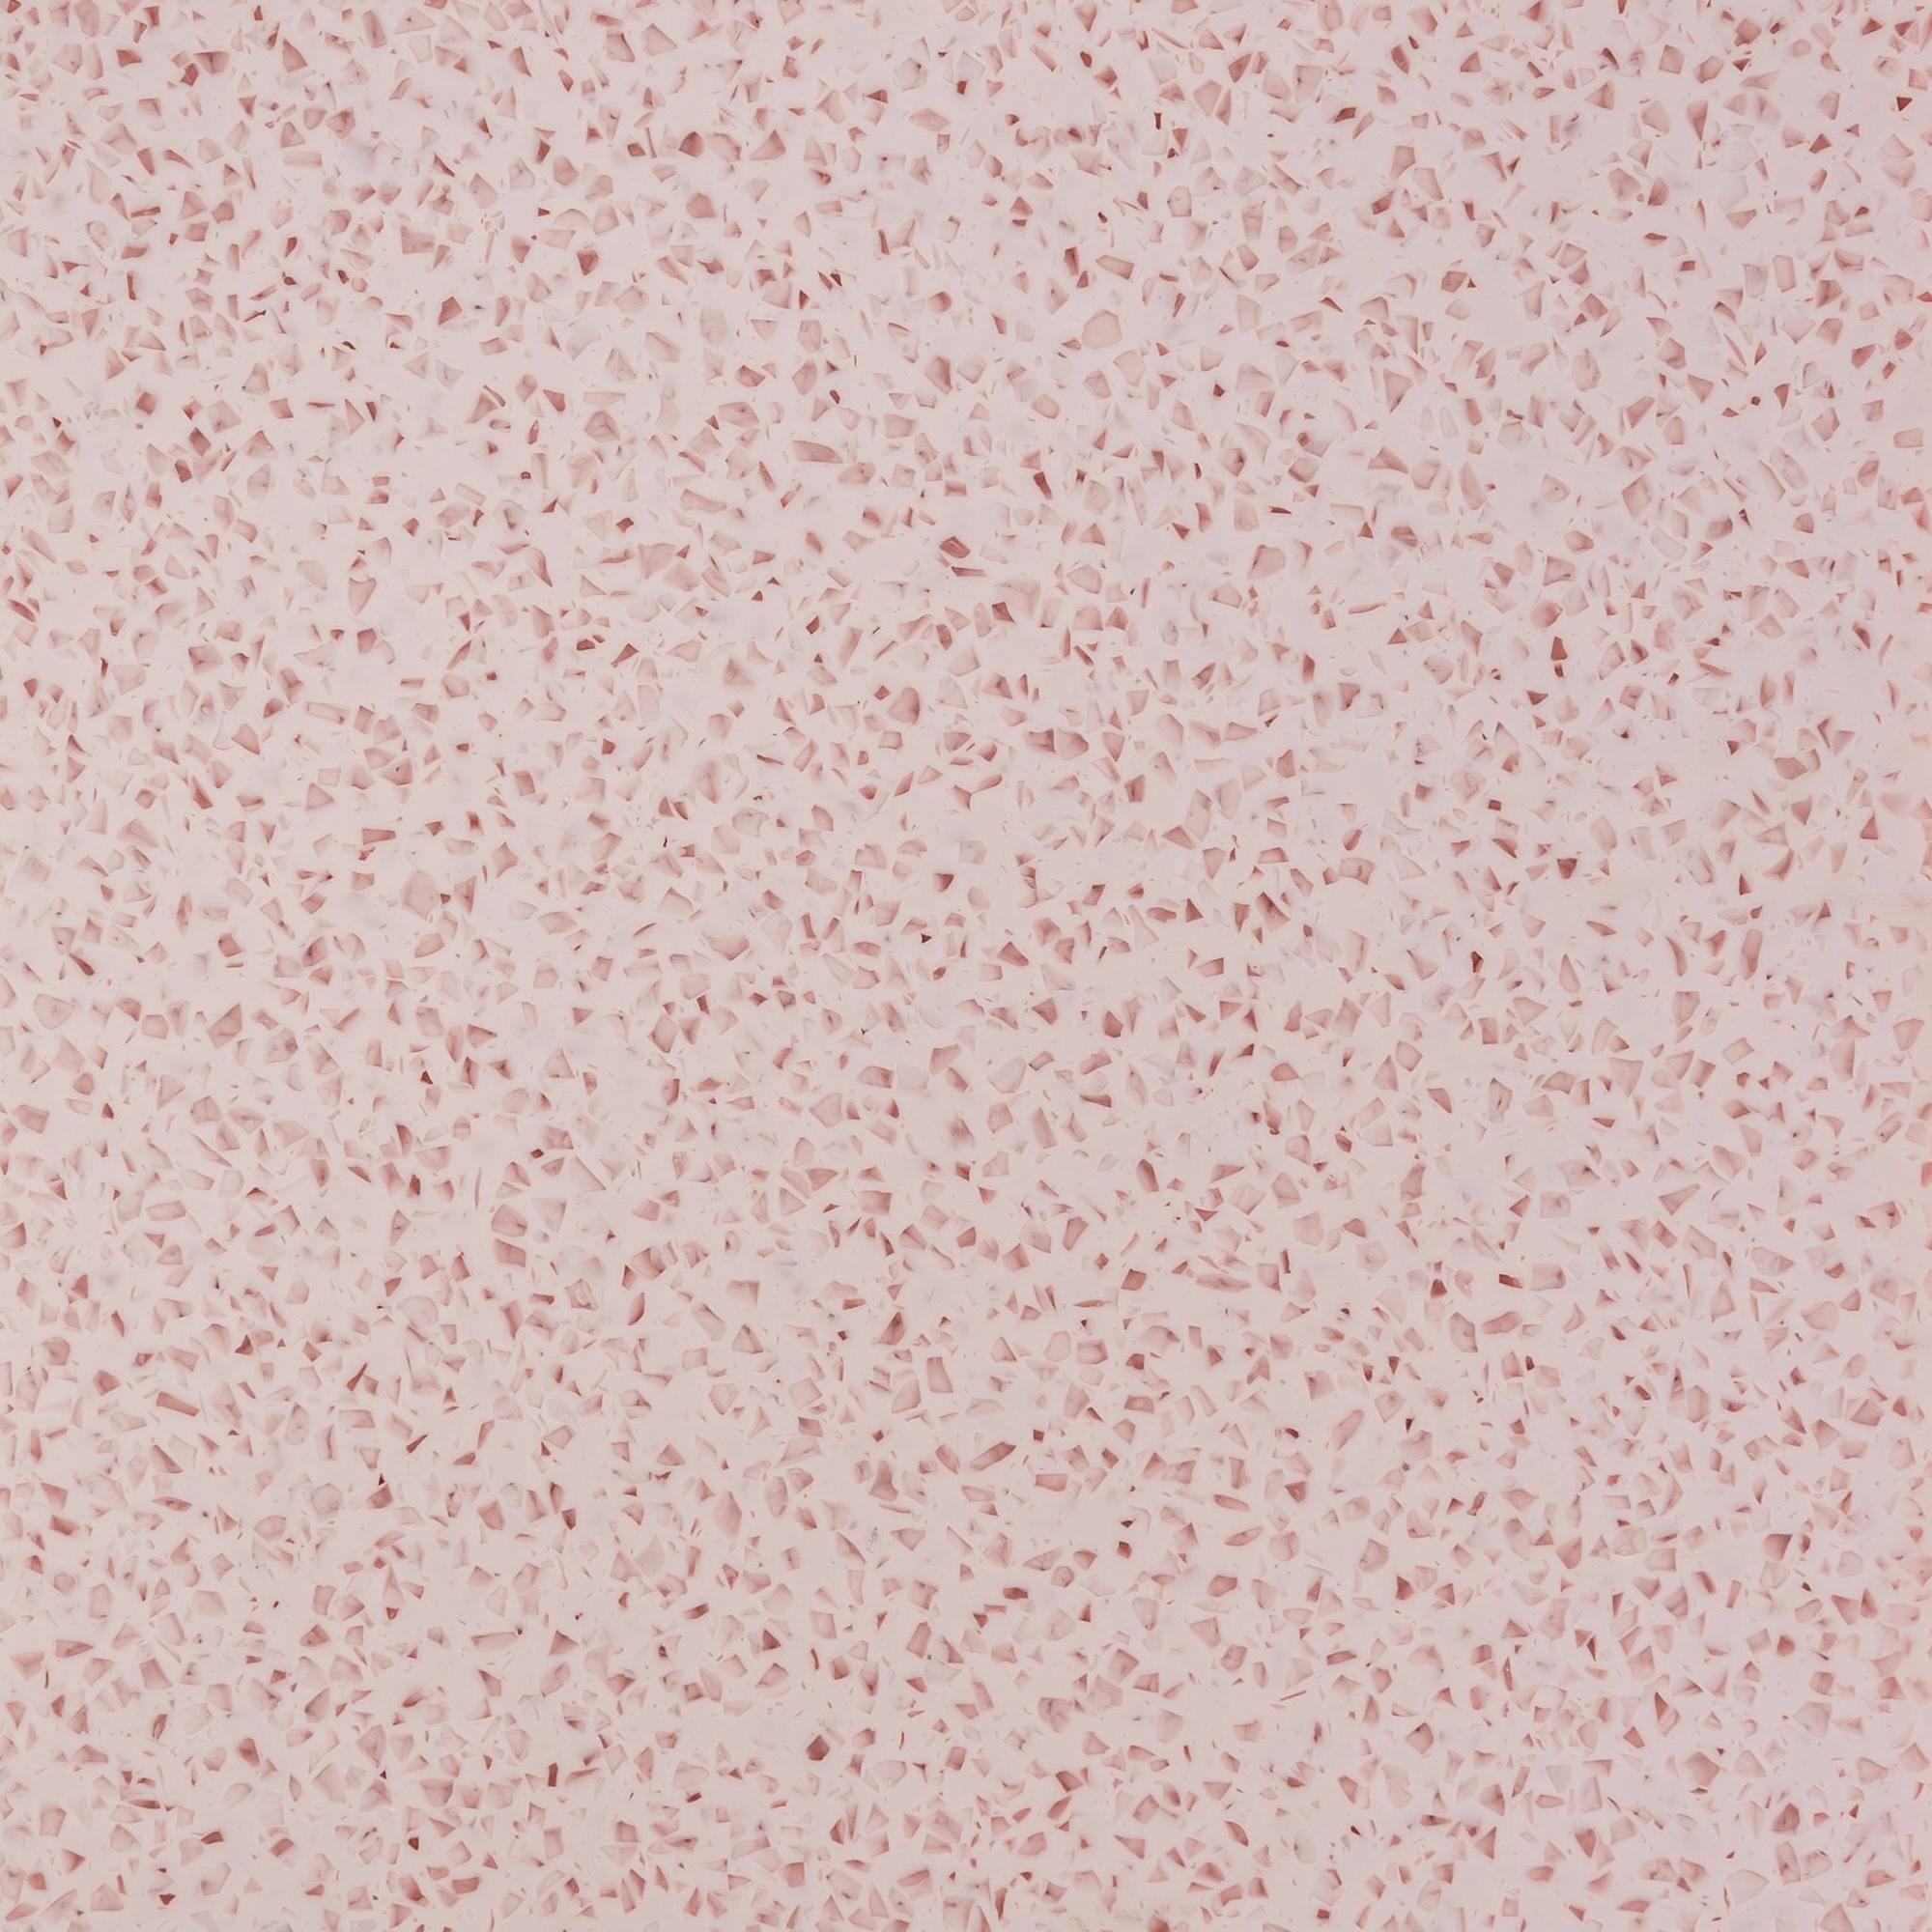 D0560 00 560 Durat Light pink clear small speckles sample